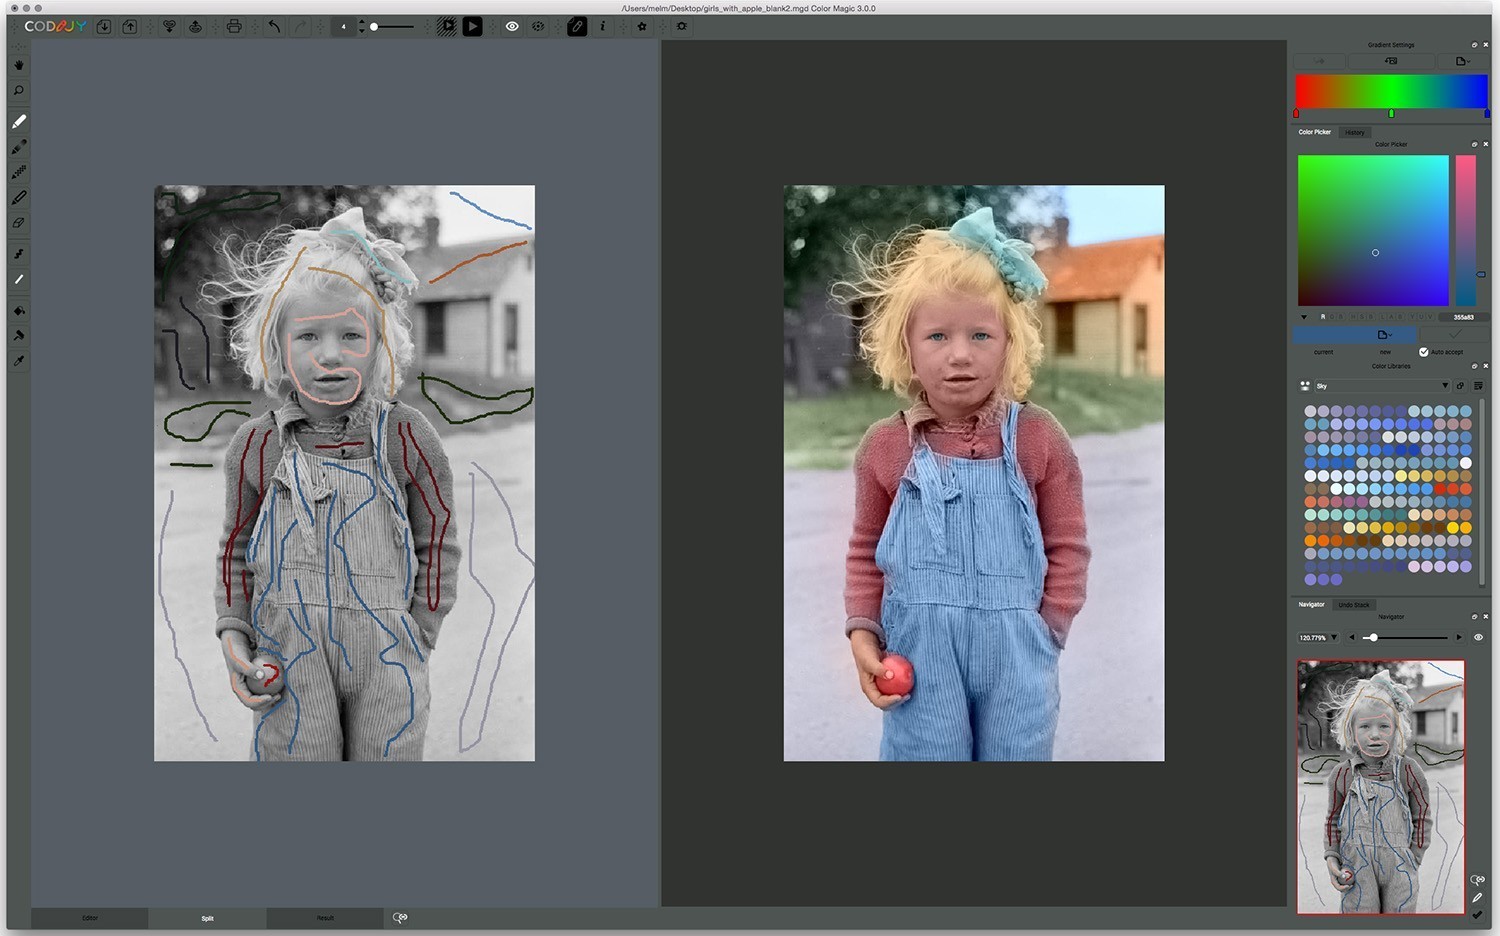 ColorMagic for Mac turns B&W photos into color